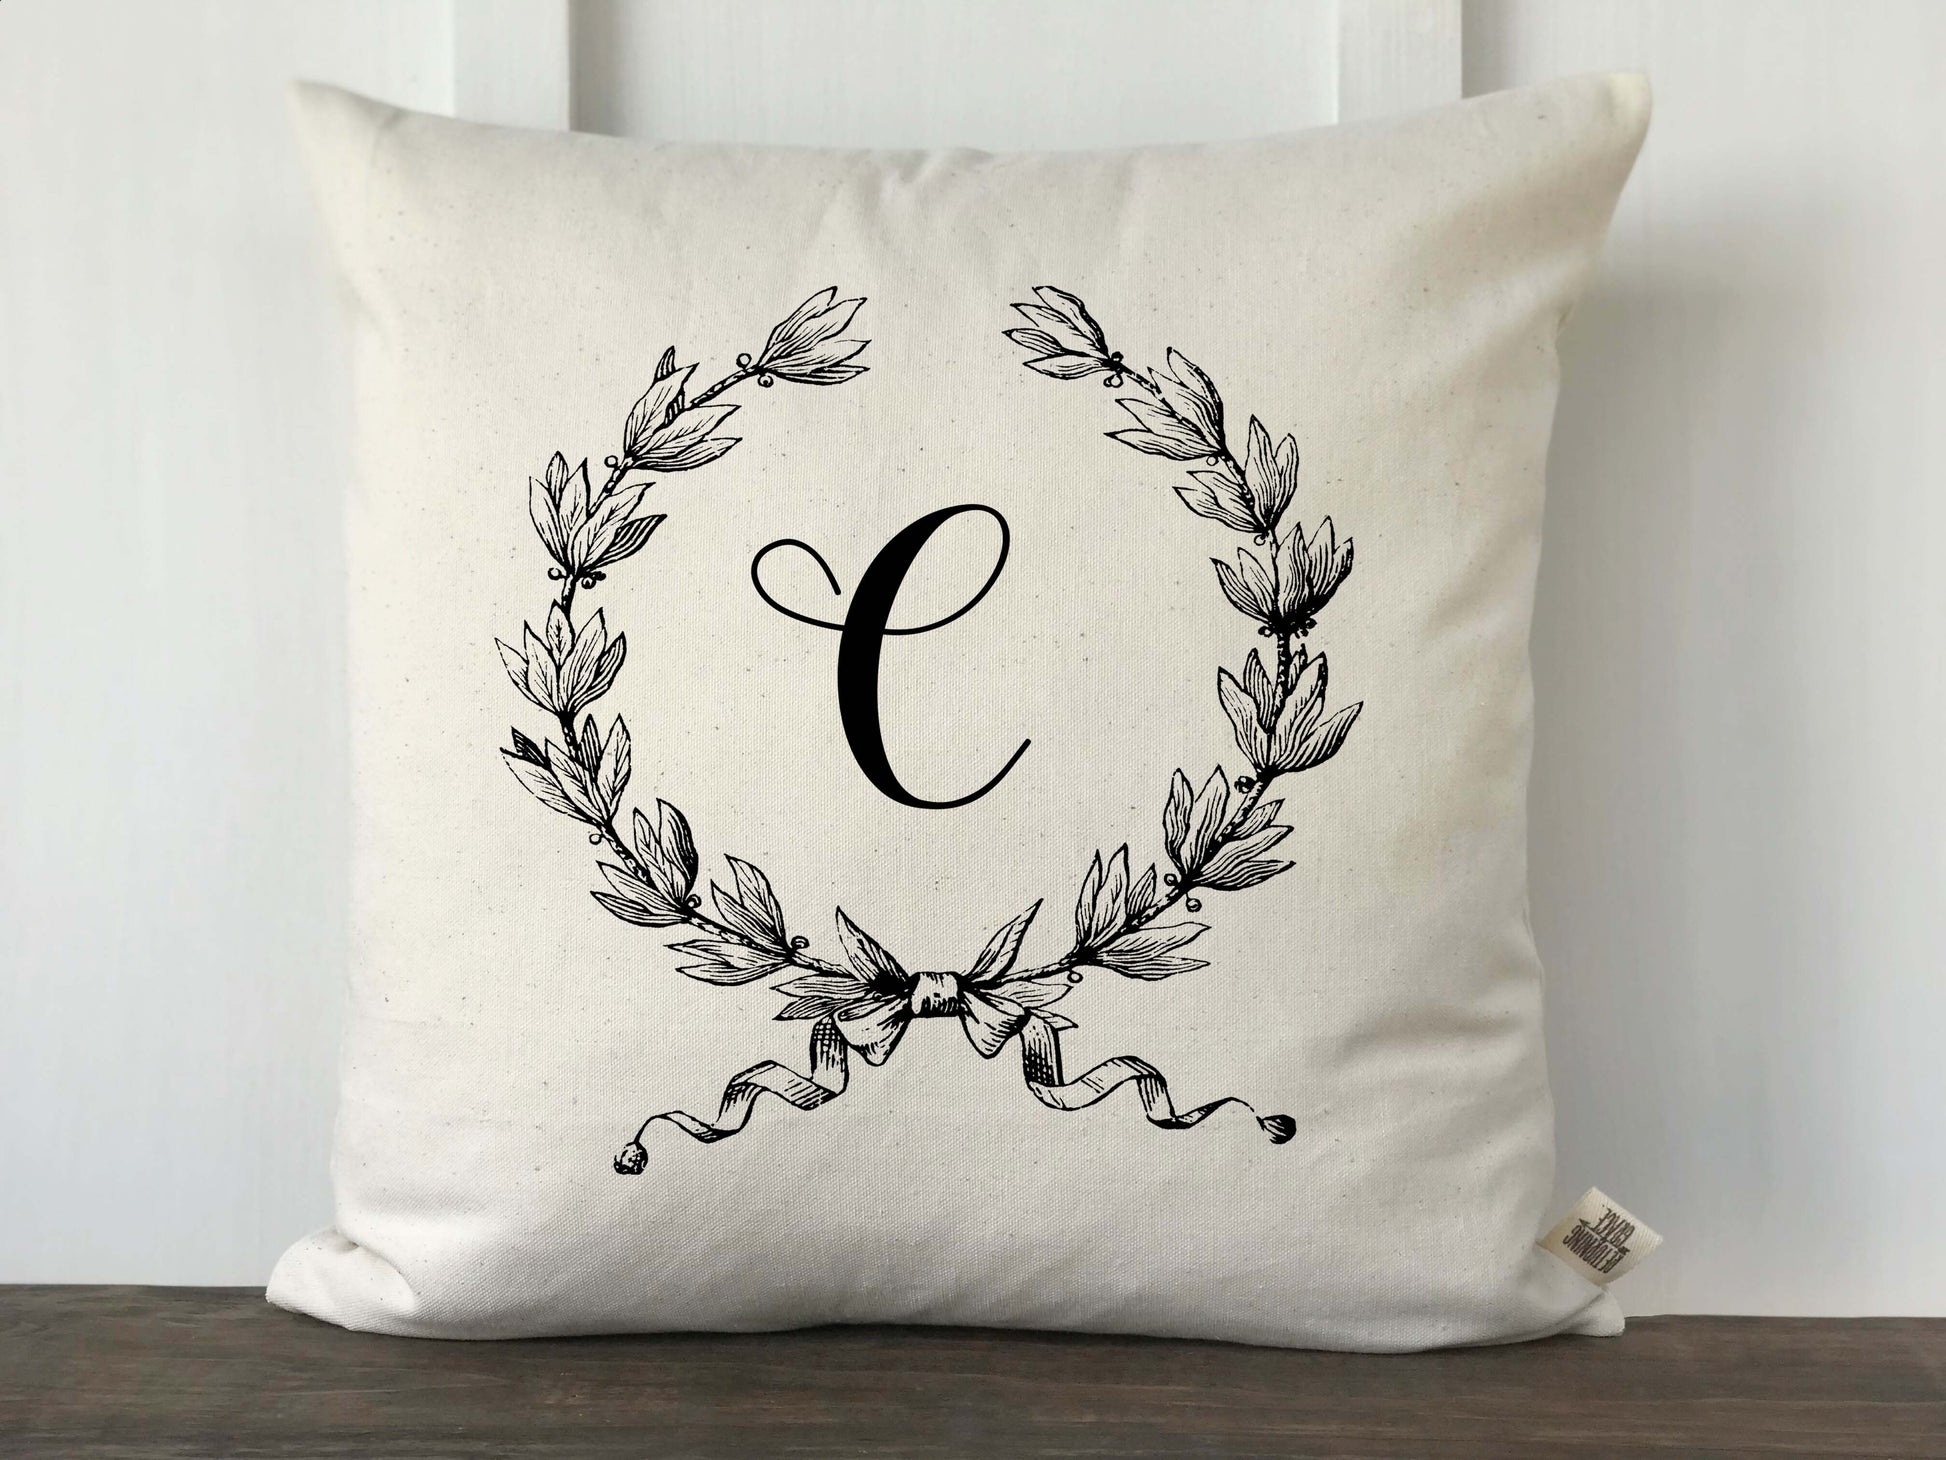 French Wreath Monogram Pillow Cover - Returning Grace Designs